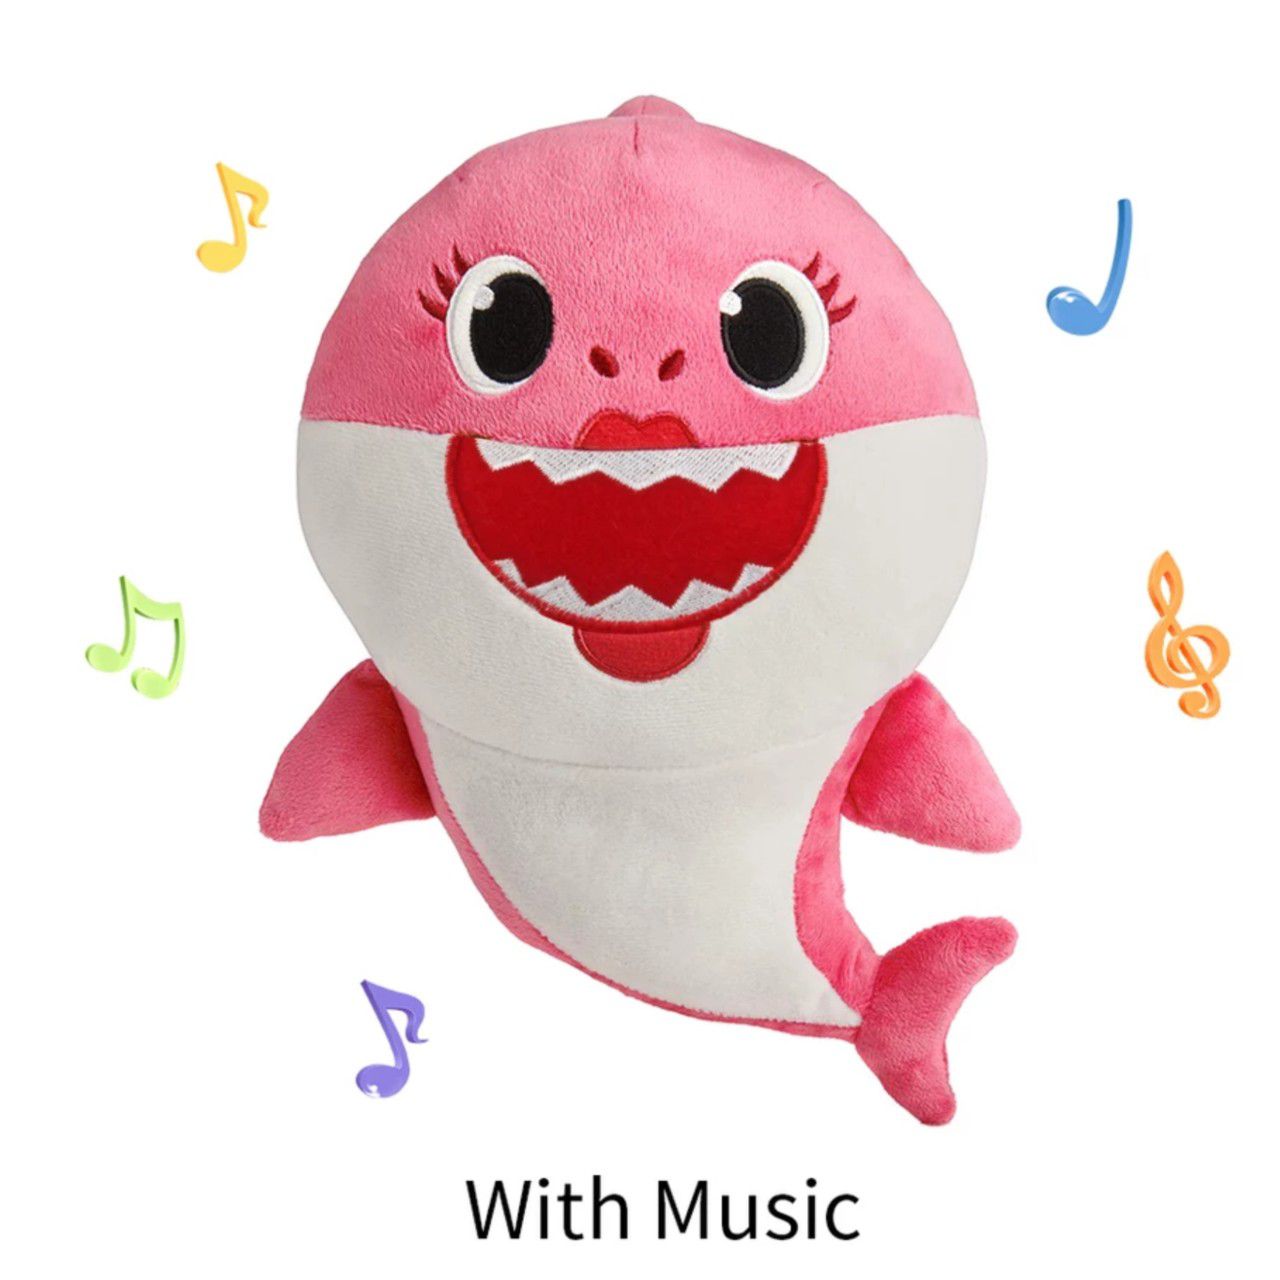 Baby Shark Toy Sings Baby shark song